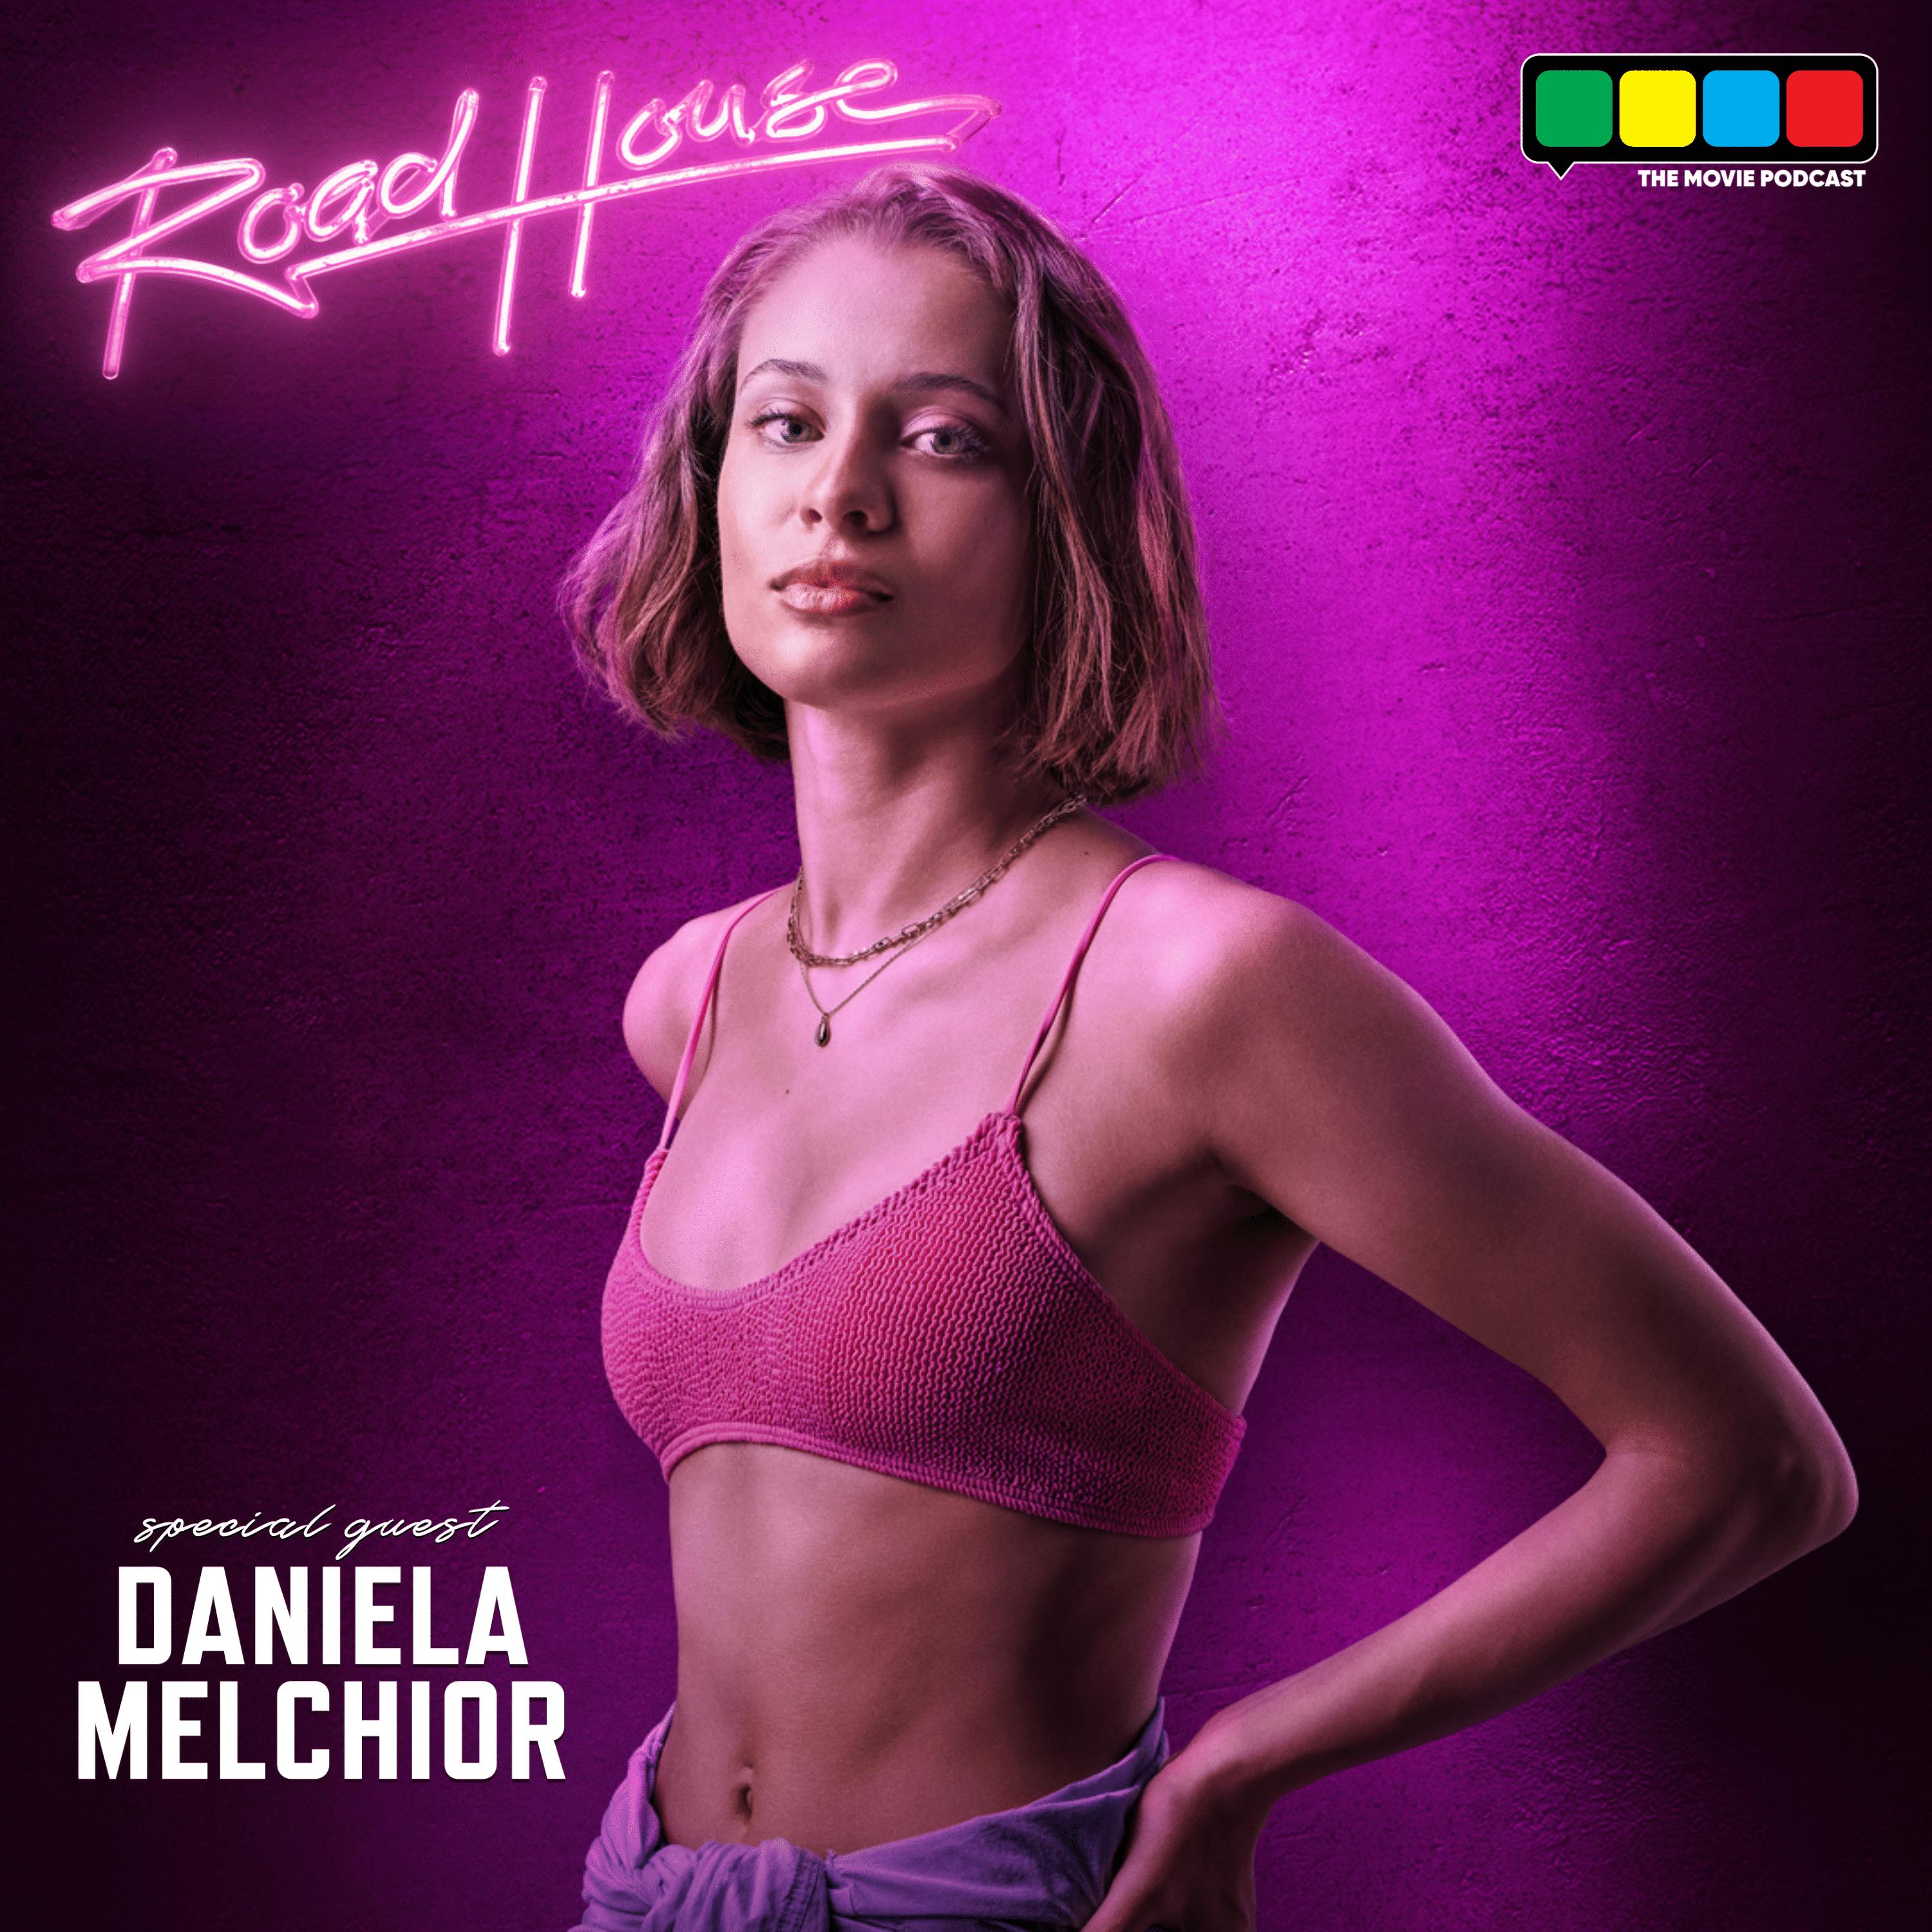 Road House Interview with Daniela Melchior (The Suicide Squad, Fast X, Guardians of the Galaxy)